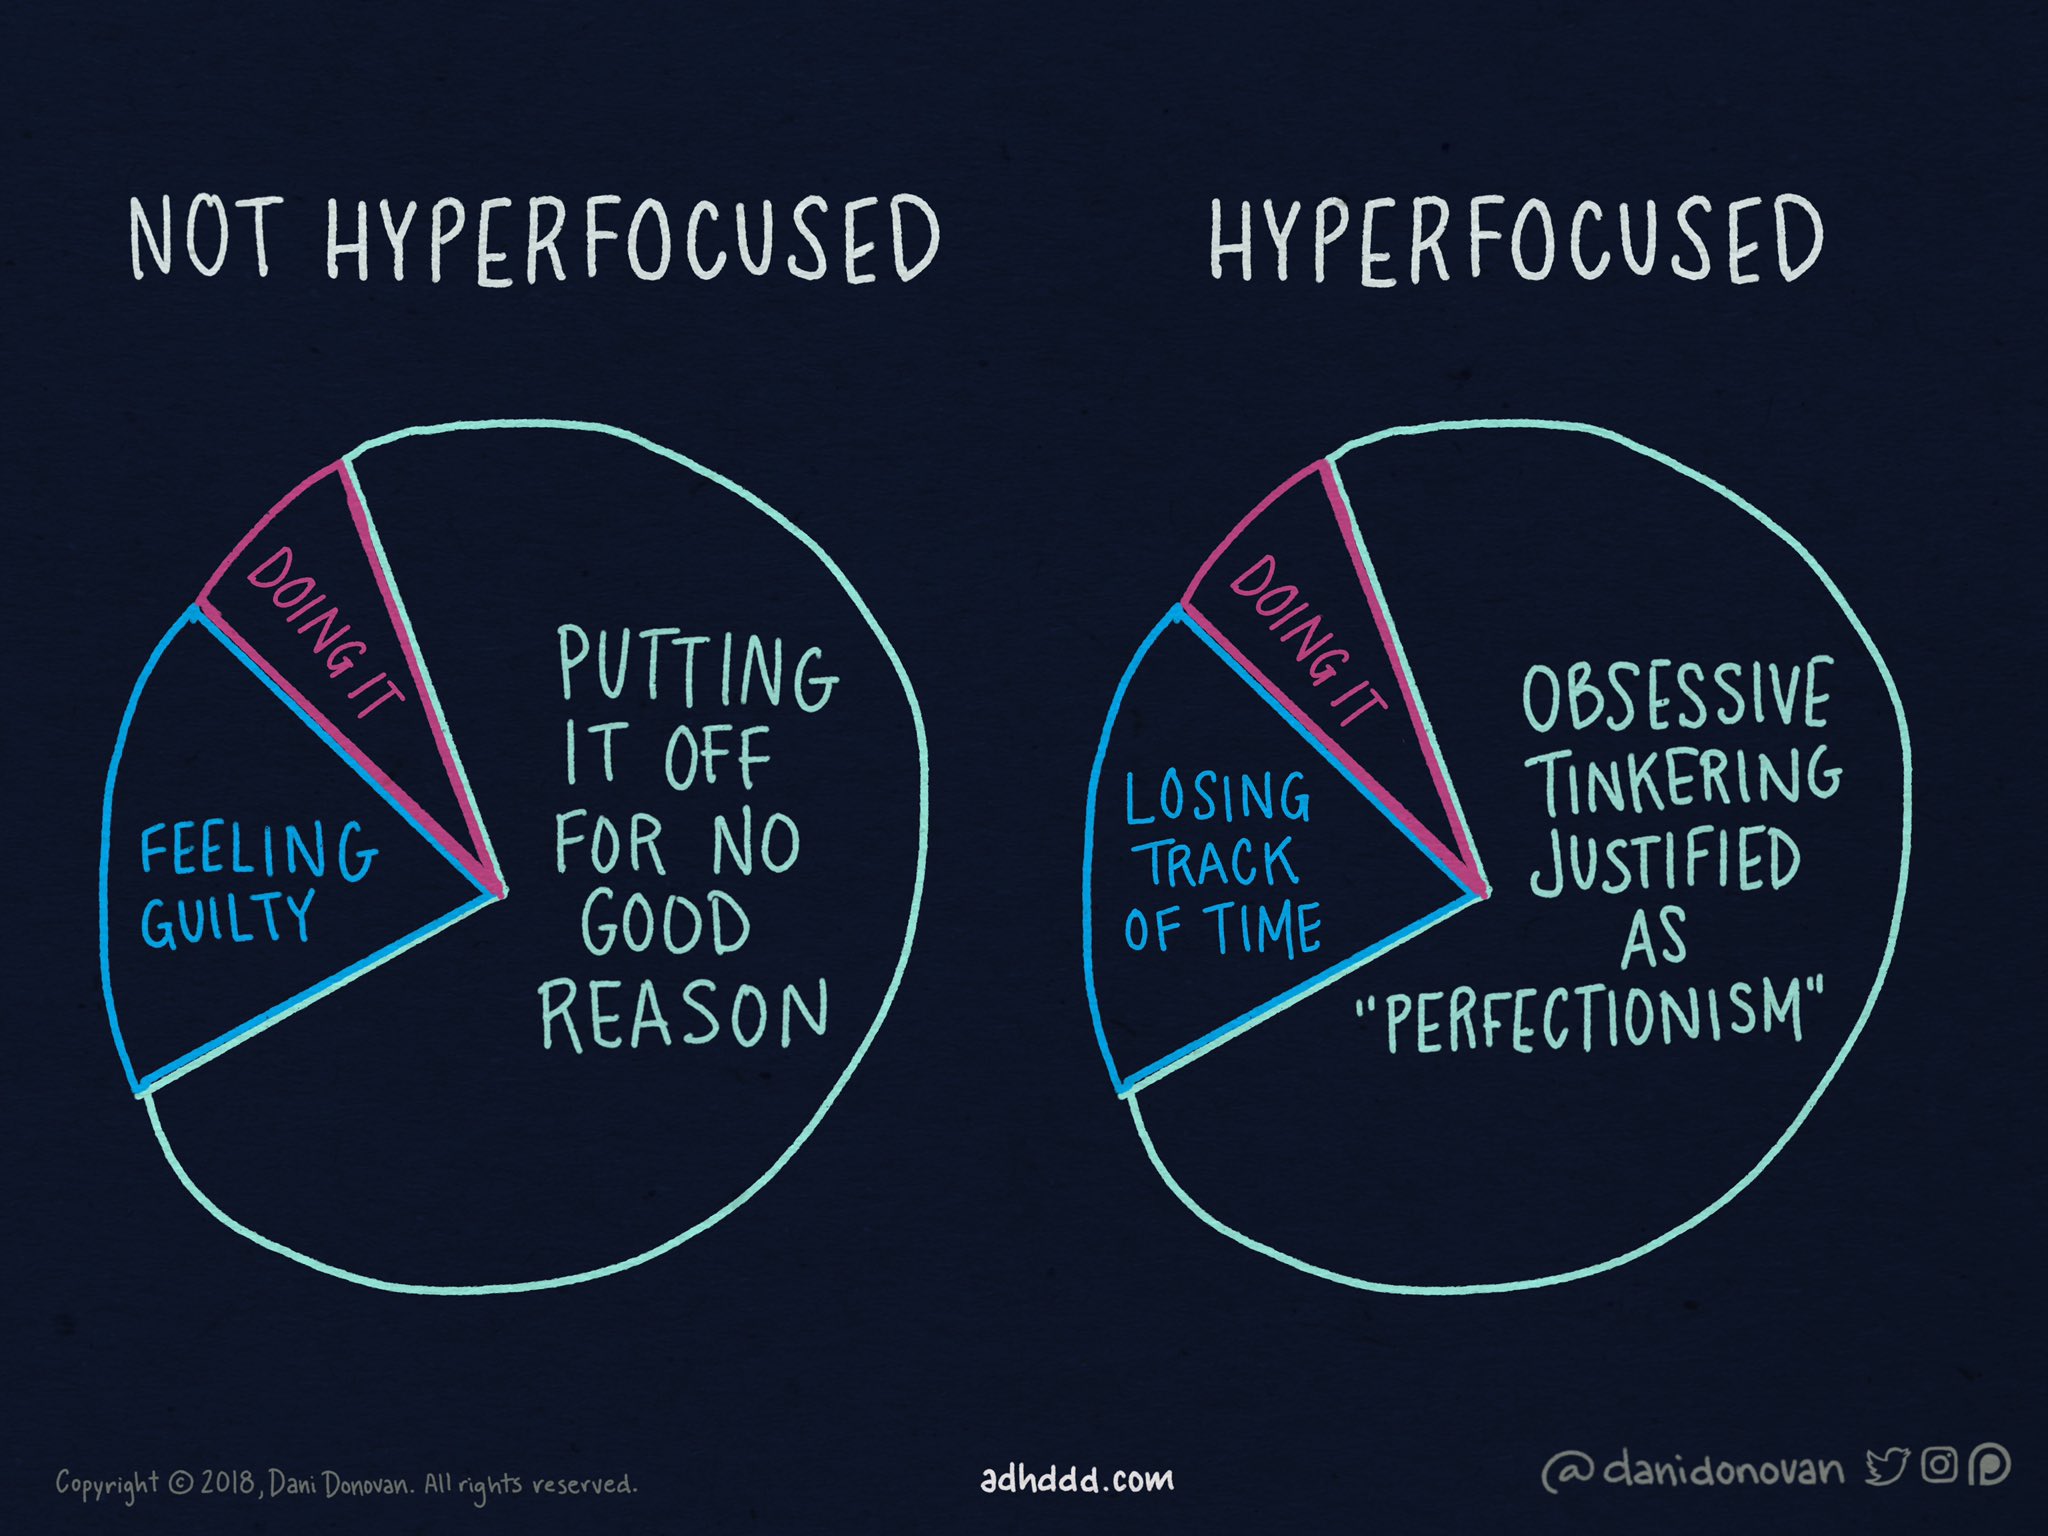 Not hyperfocused pie chart: sliver of doing it, small piece of feeling guilty, and 3/4 putting it off for not good reason Hyperfocused pie chart: sliver of doing it, small piece of losing track of time, 3/4 obsessive tinkering justified as "perfectionism"